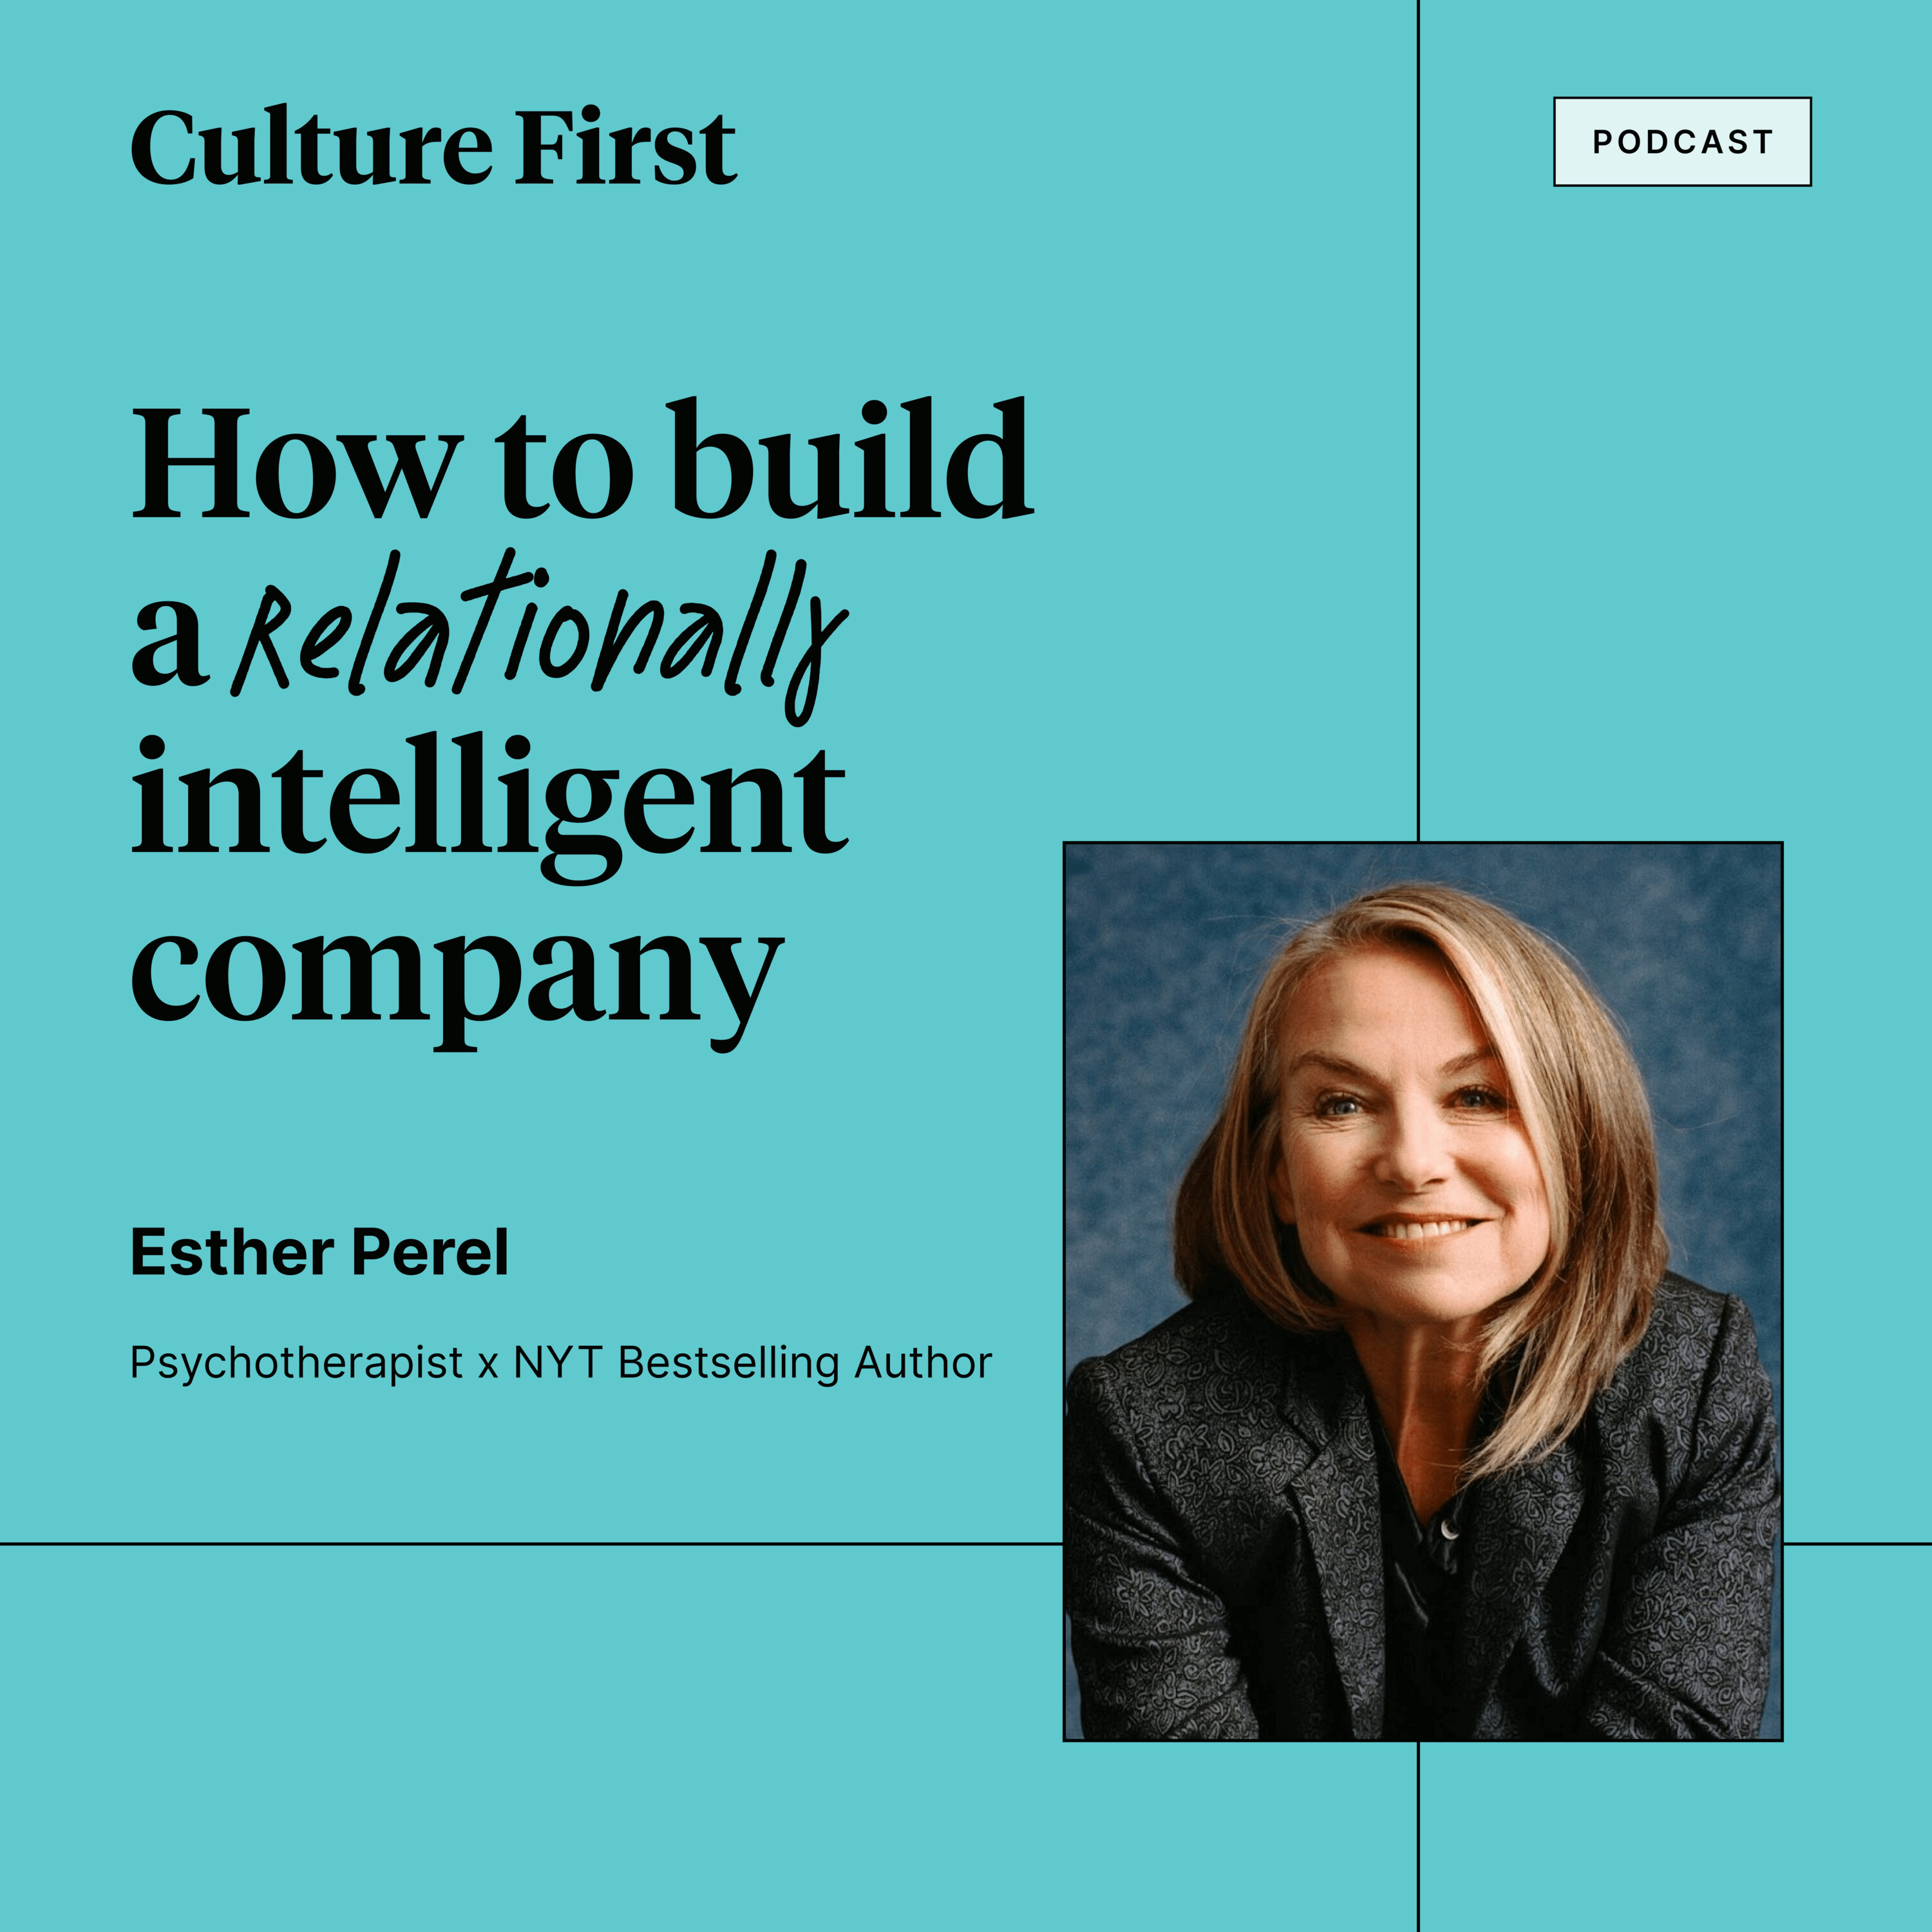 Esther Perel on building a relationally intelligent workplace